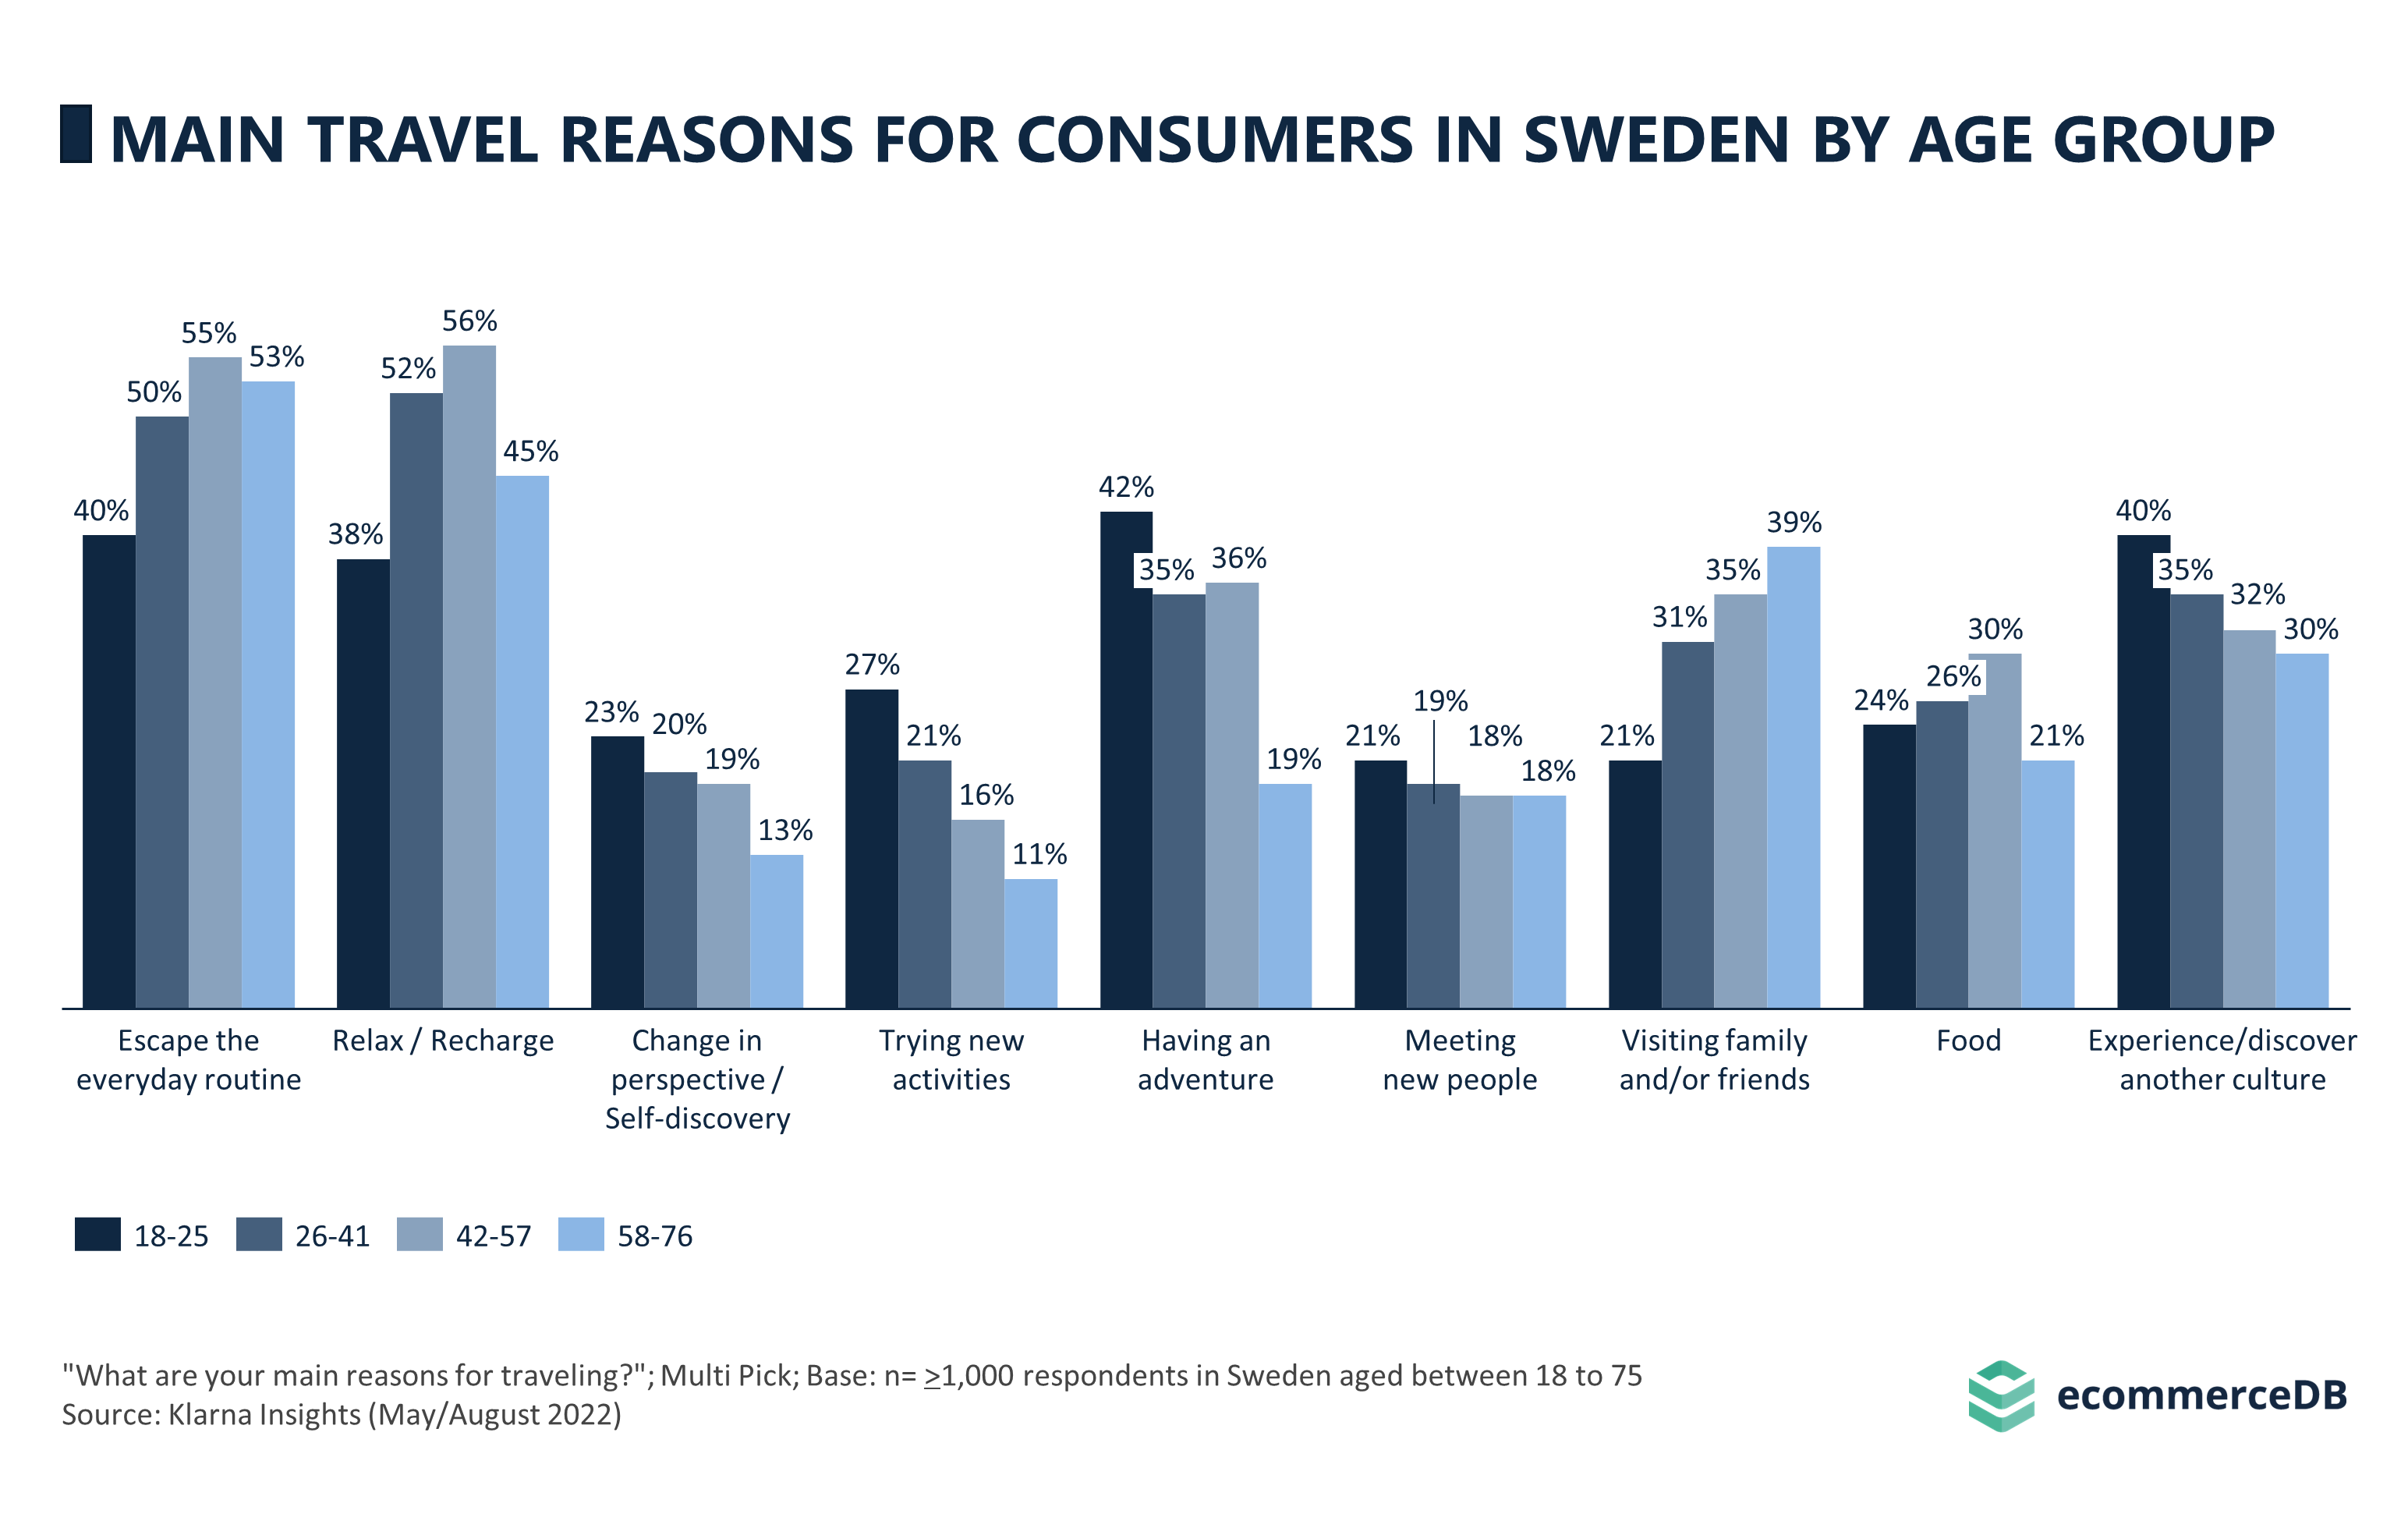 Main Travel Reasons for Consumers in Sweden by Age Group